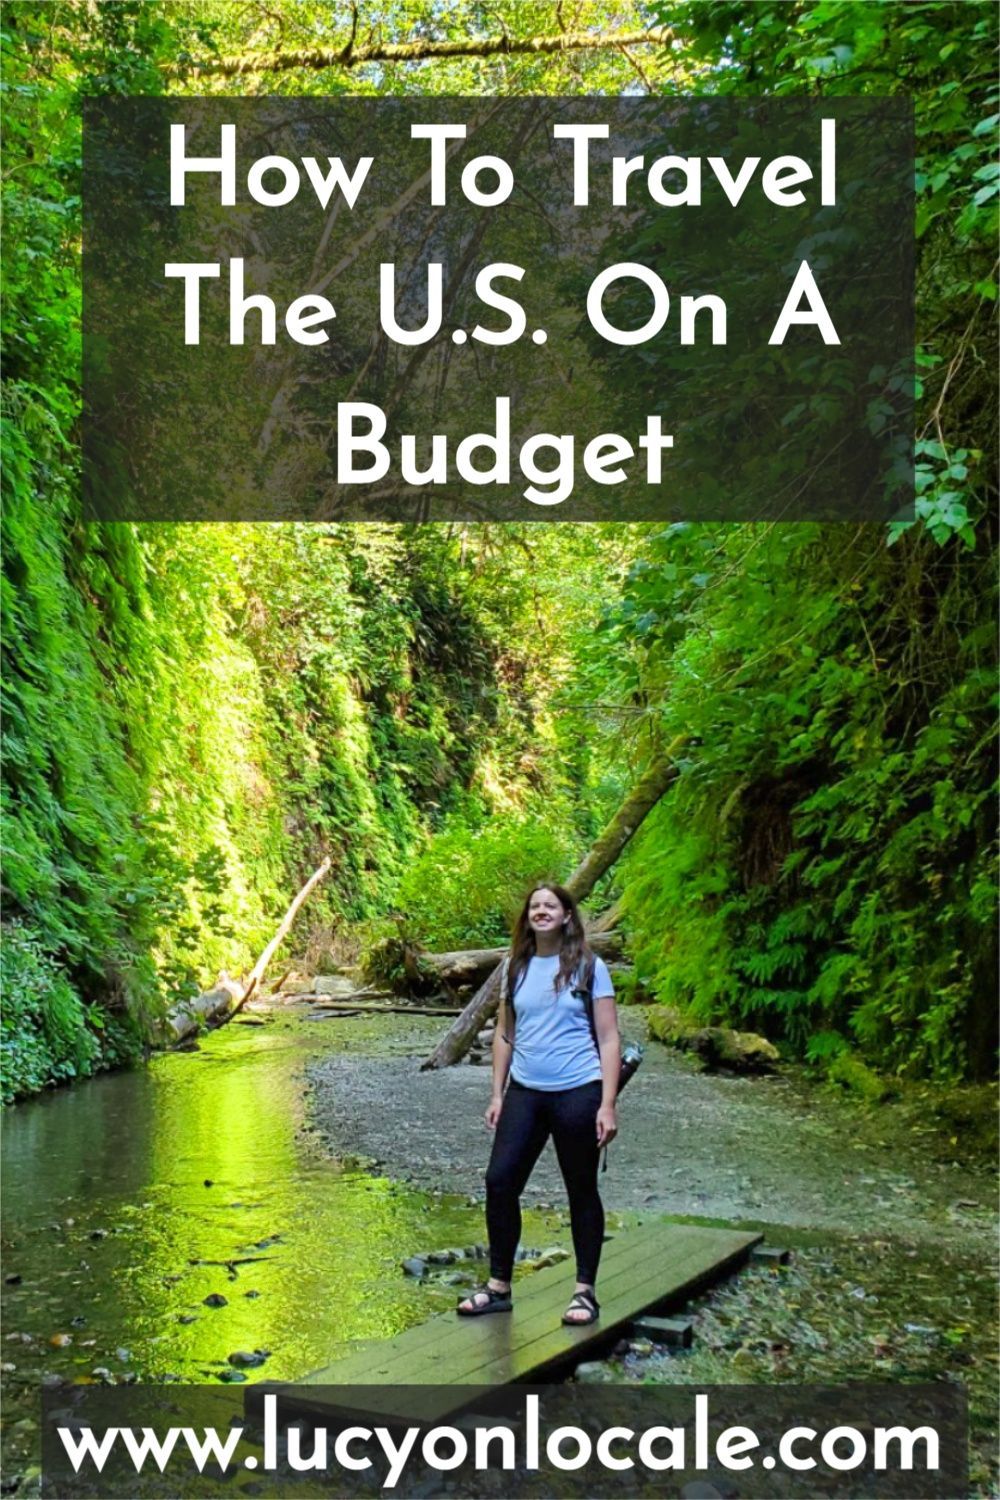 How to travel the U.S. on a budget